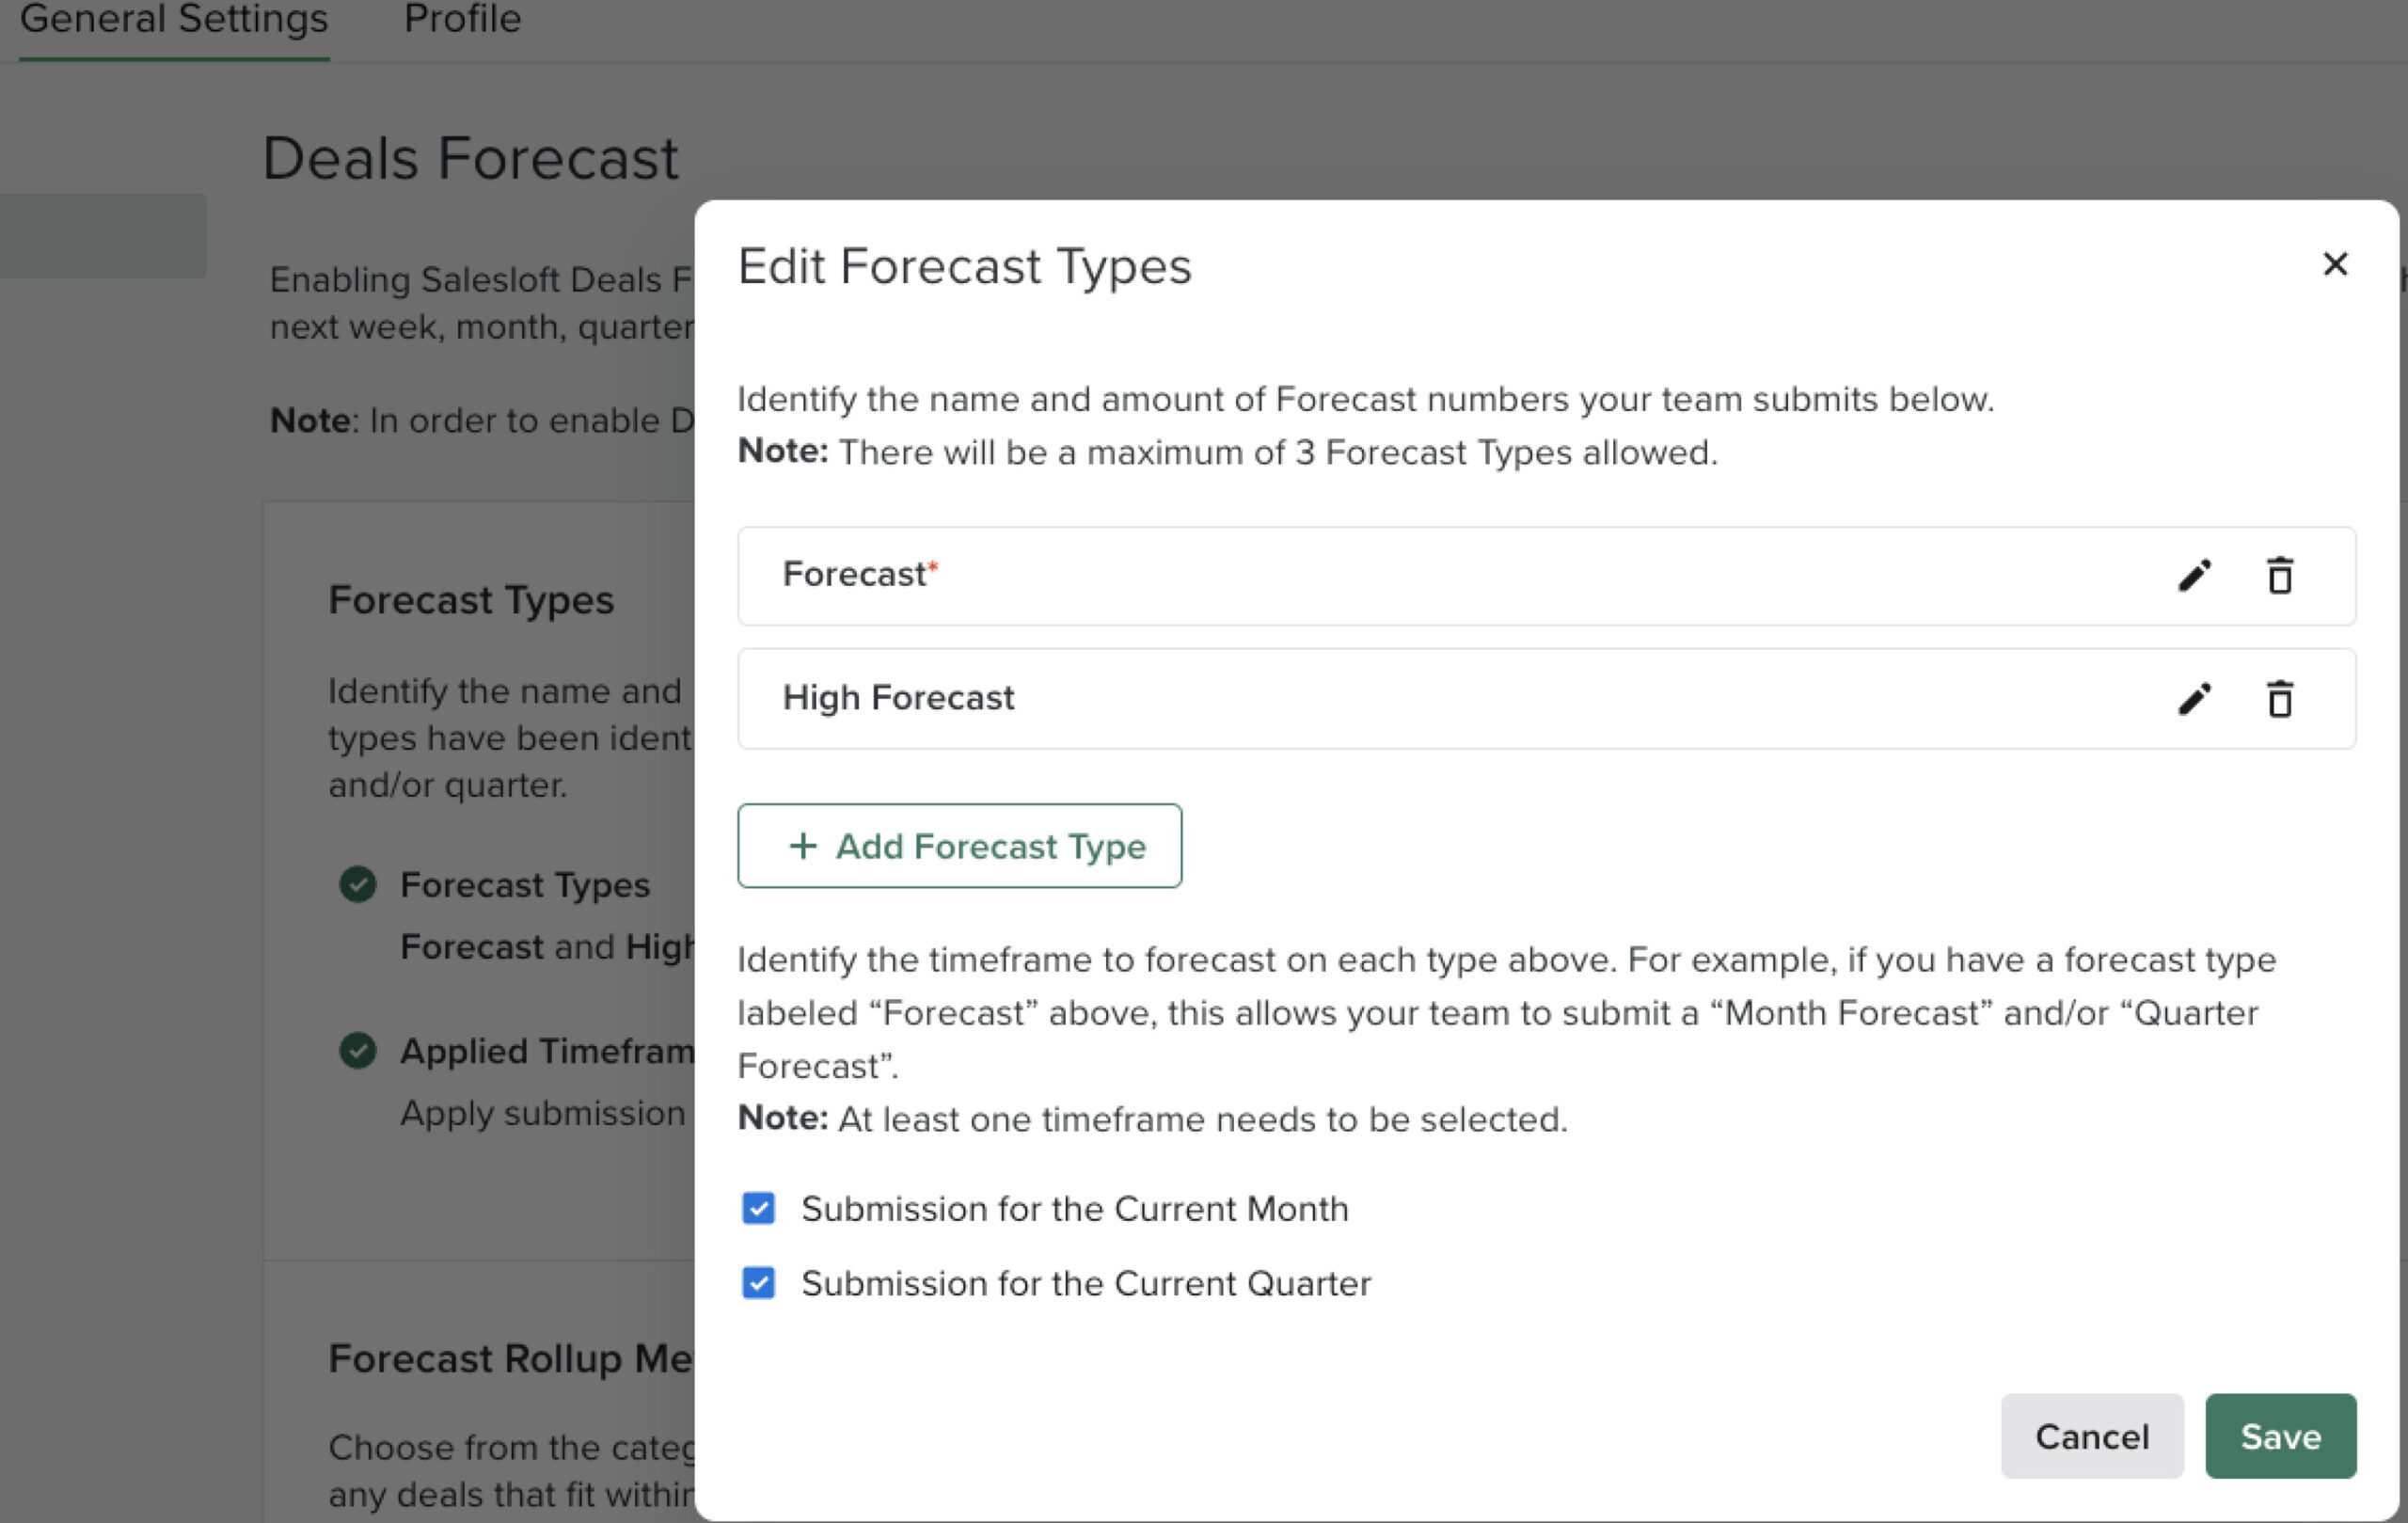 Design Product News Post Graphics on New Forecast Features4 scaled.jpeg